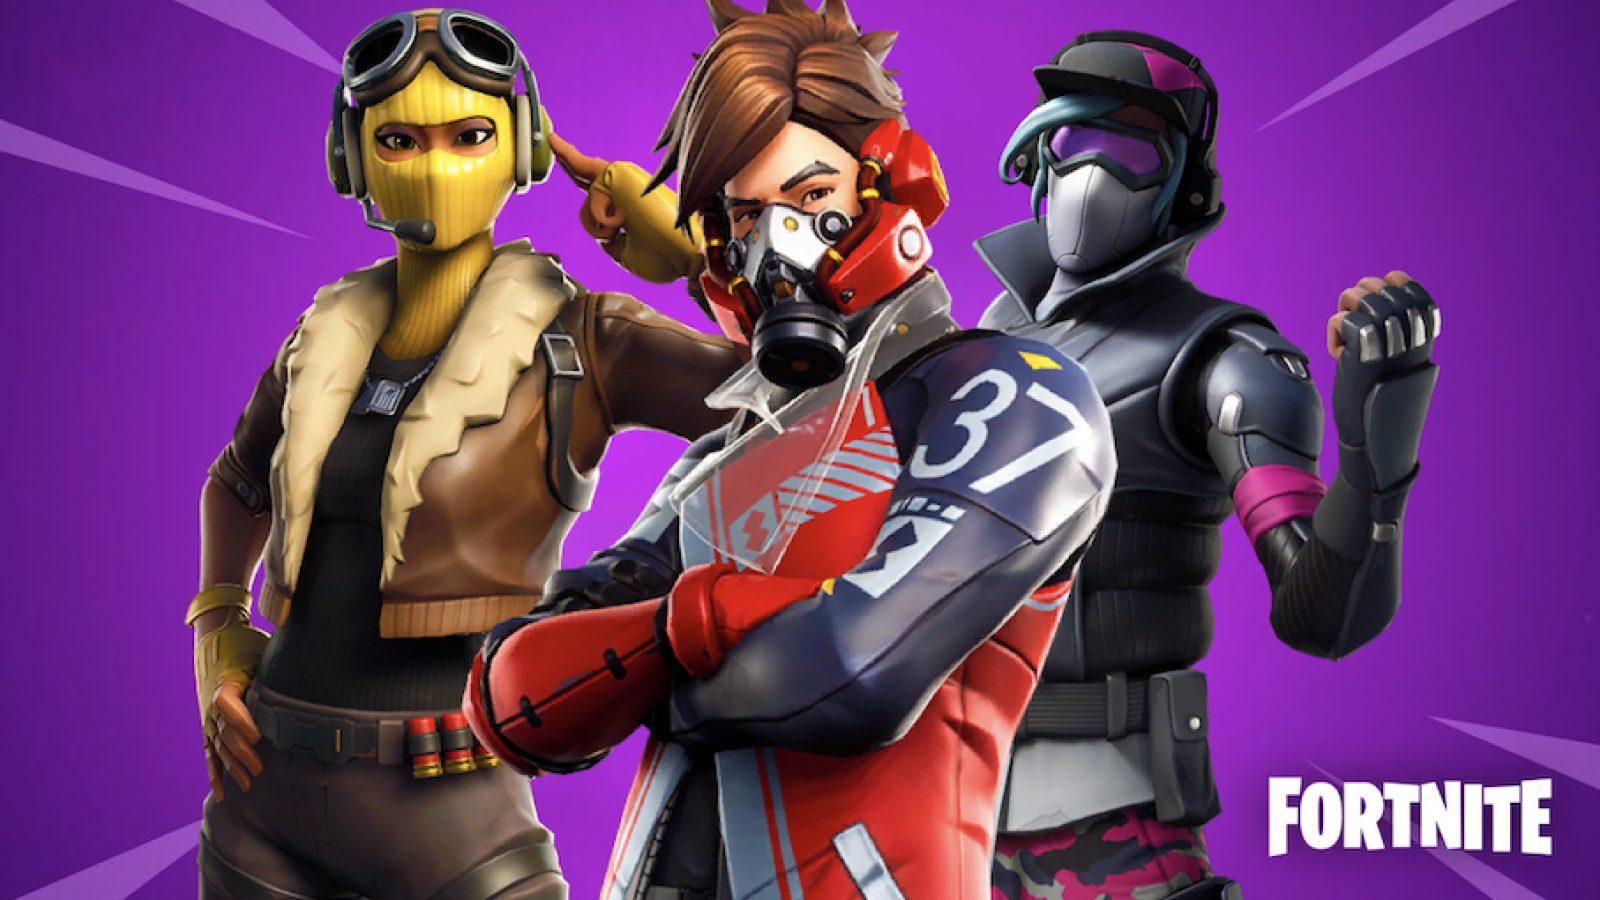 Watch These Fortnite Teams Compete for $25k in the CLOUD!